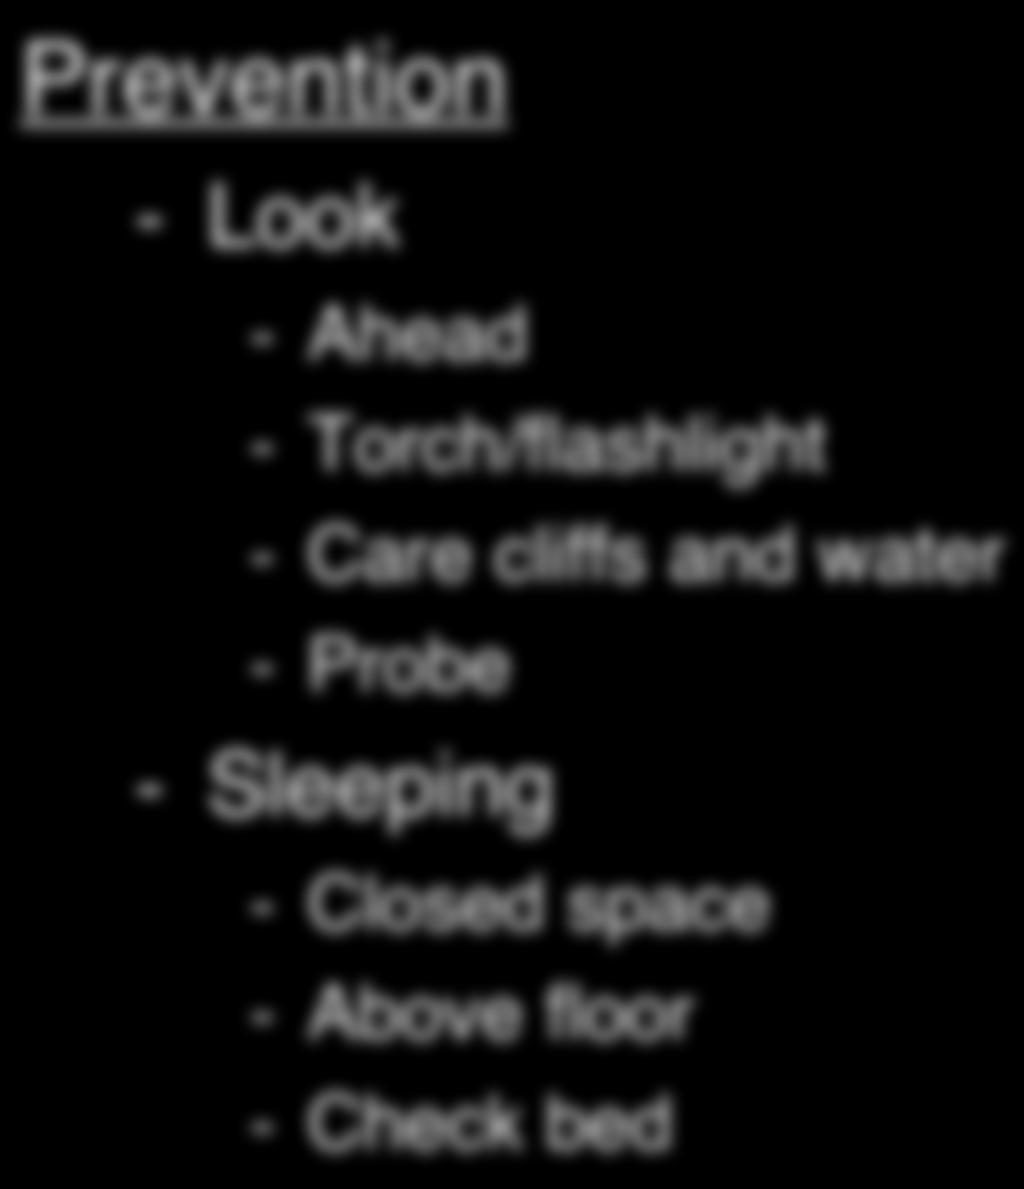 Prevention - Look - Ahead - Torch/flashlight - Care cliffs and